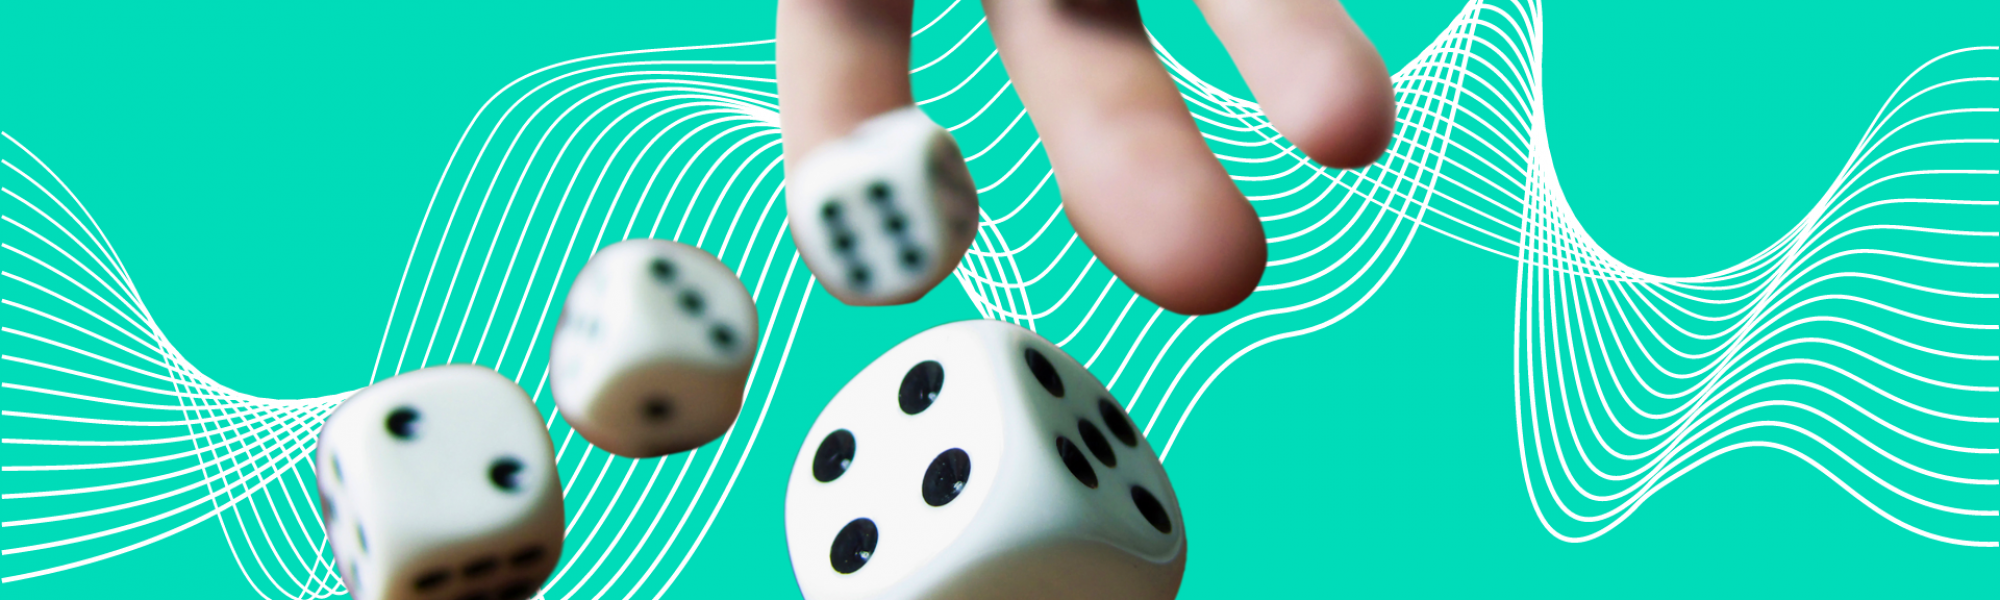 A hand rolling 5 dice